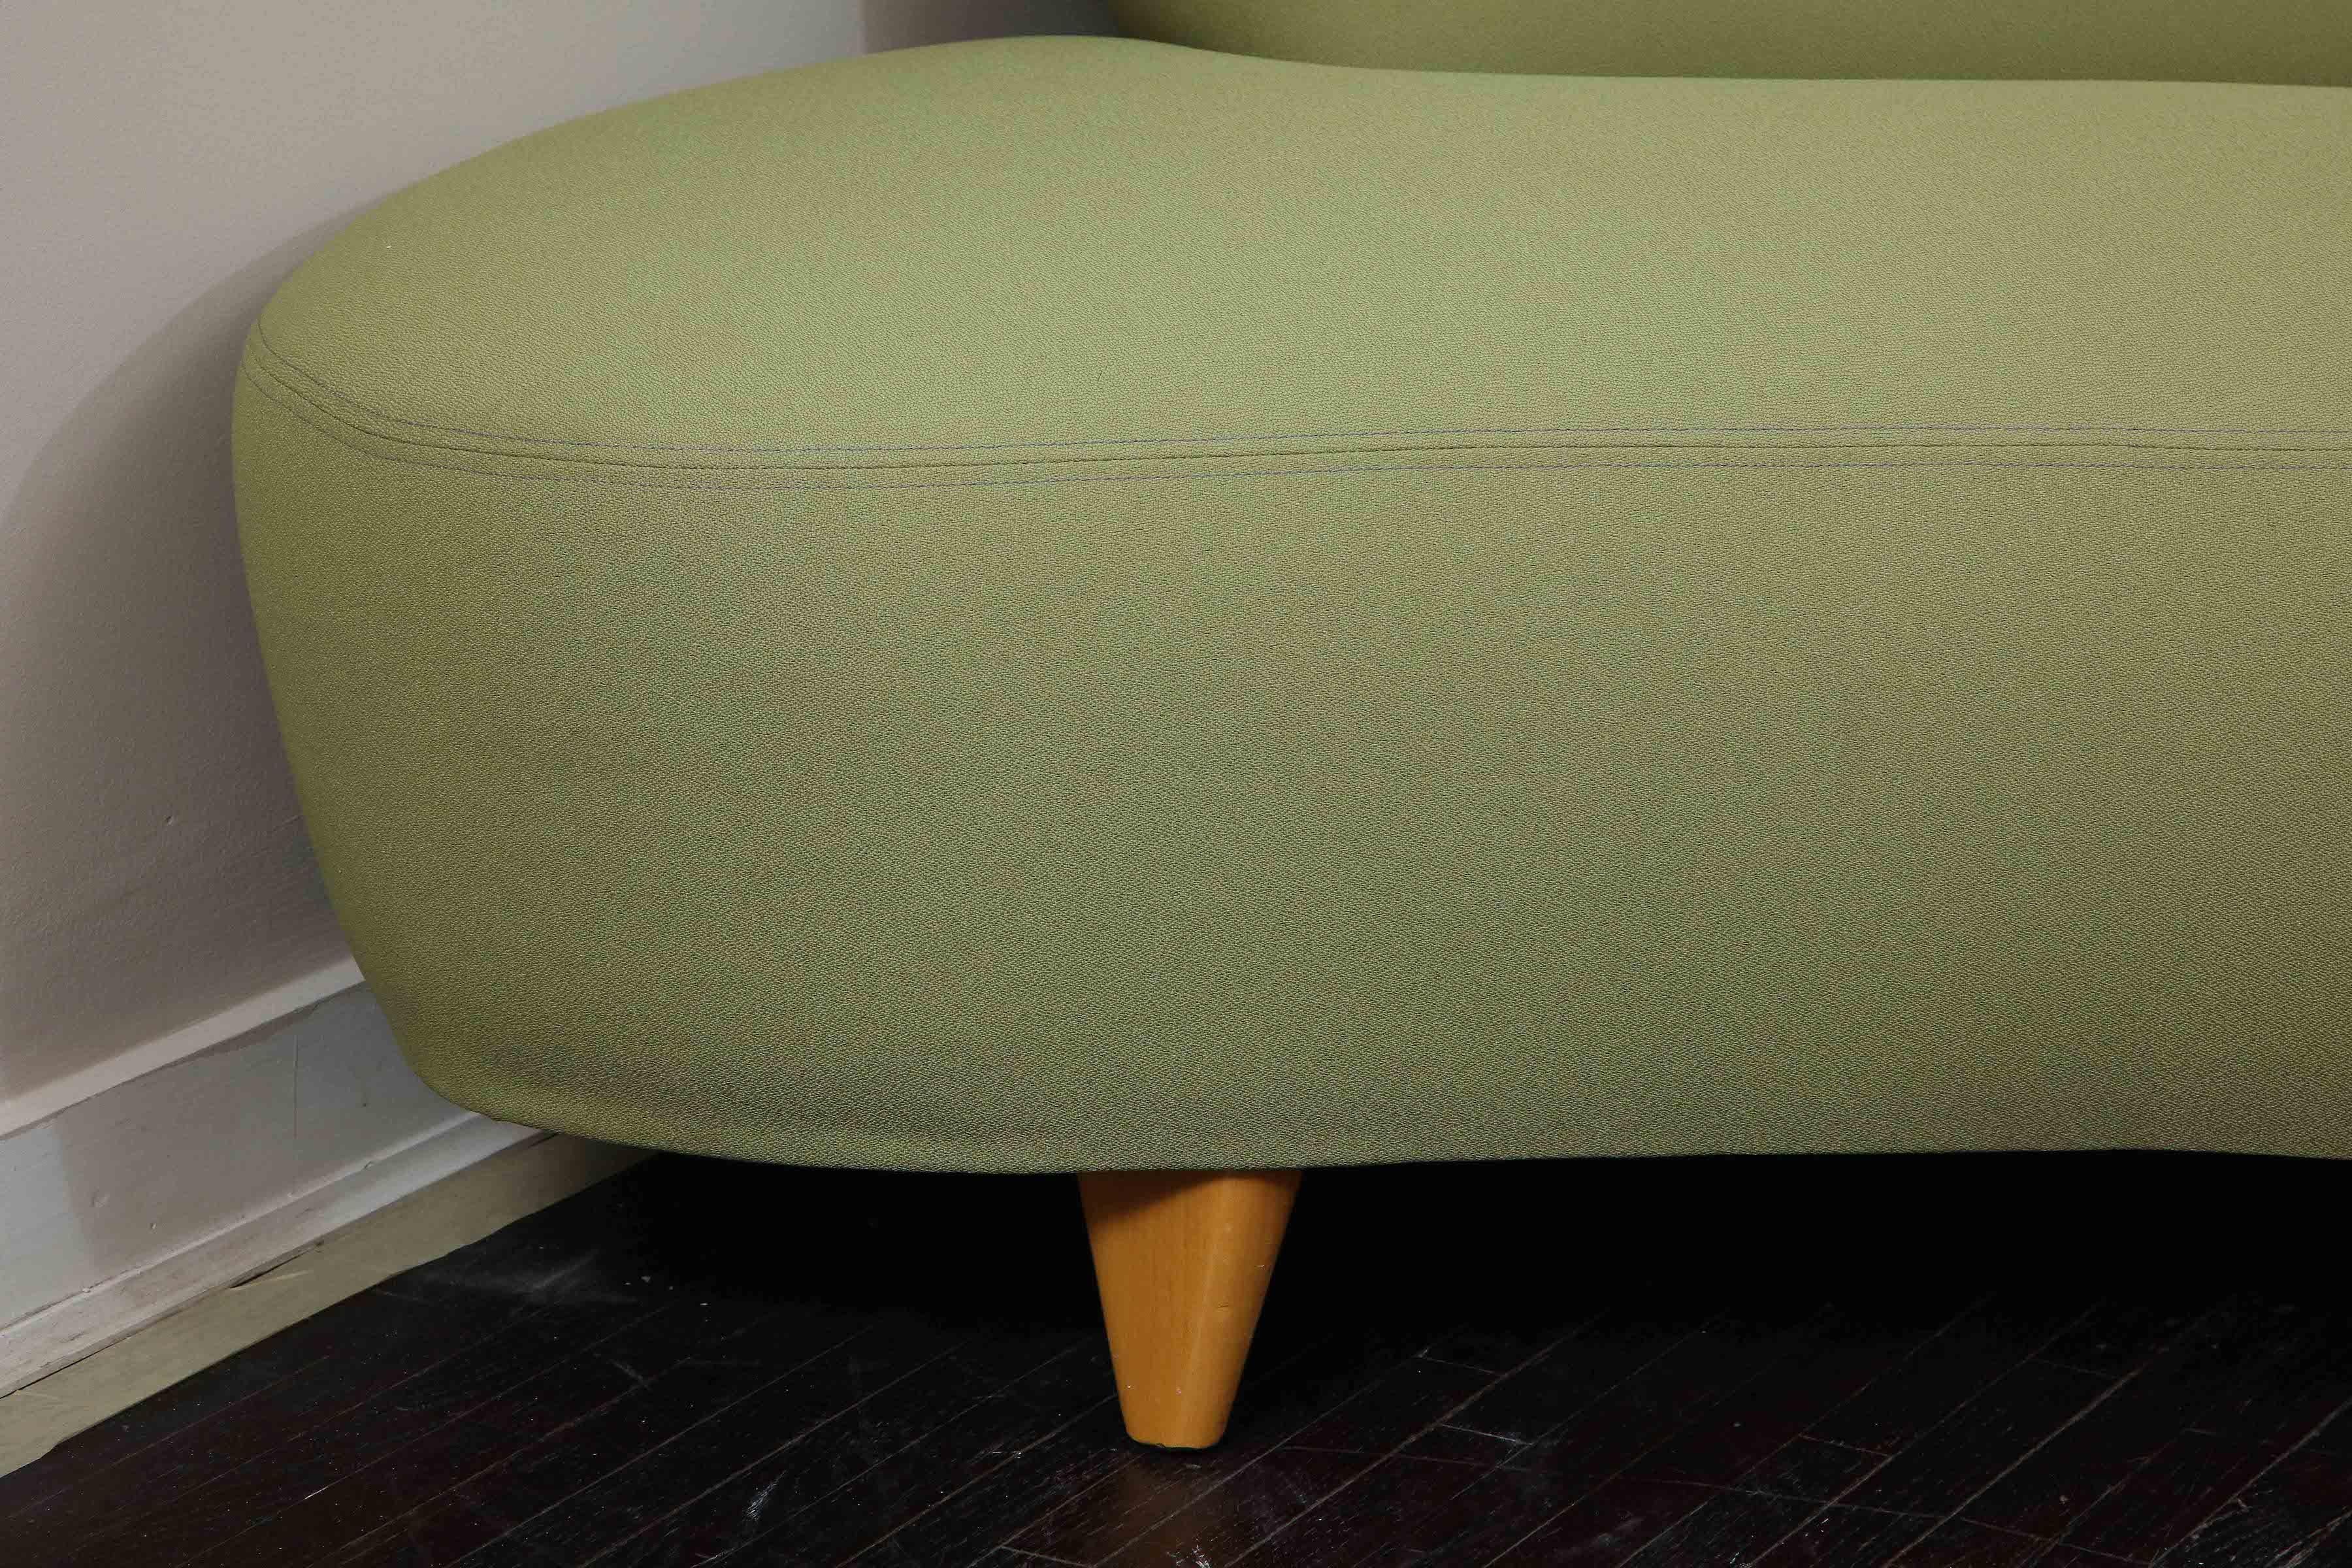 Vintage Vladimir Kagan sofa for Modernica from 1970s. A dynamic and iconic sofa piece that is in the original green lime fabric with 6 tapered wooden legs. Refinishing and reupholstery can be done with COM (Customer Owned Material) by request.